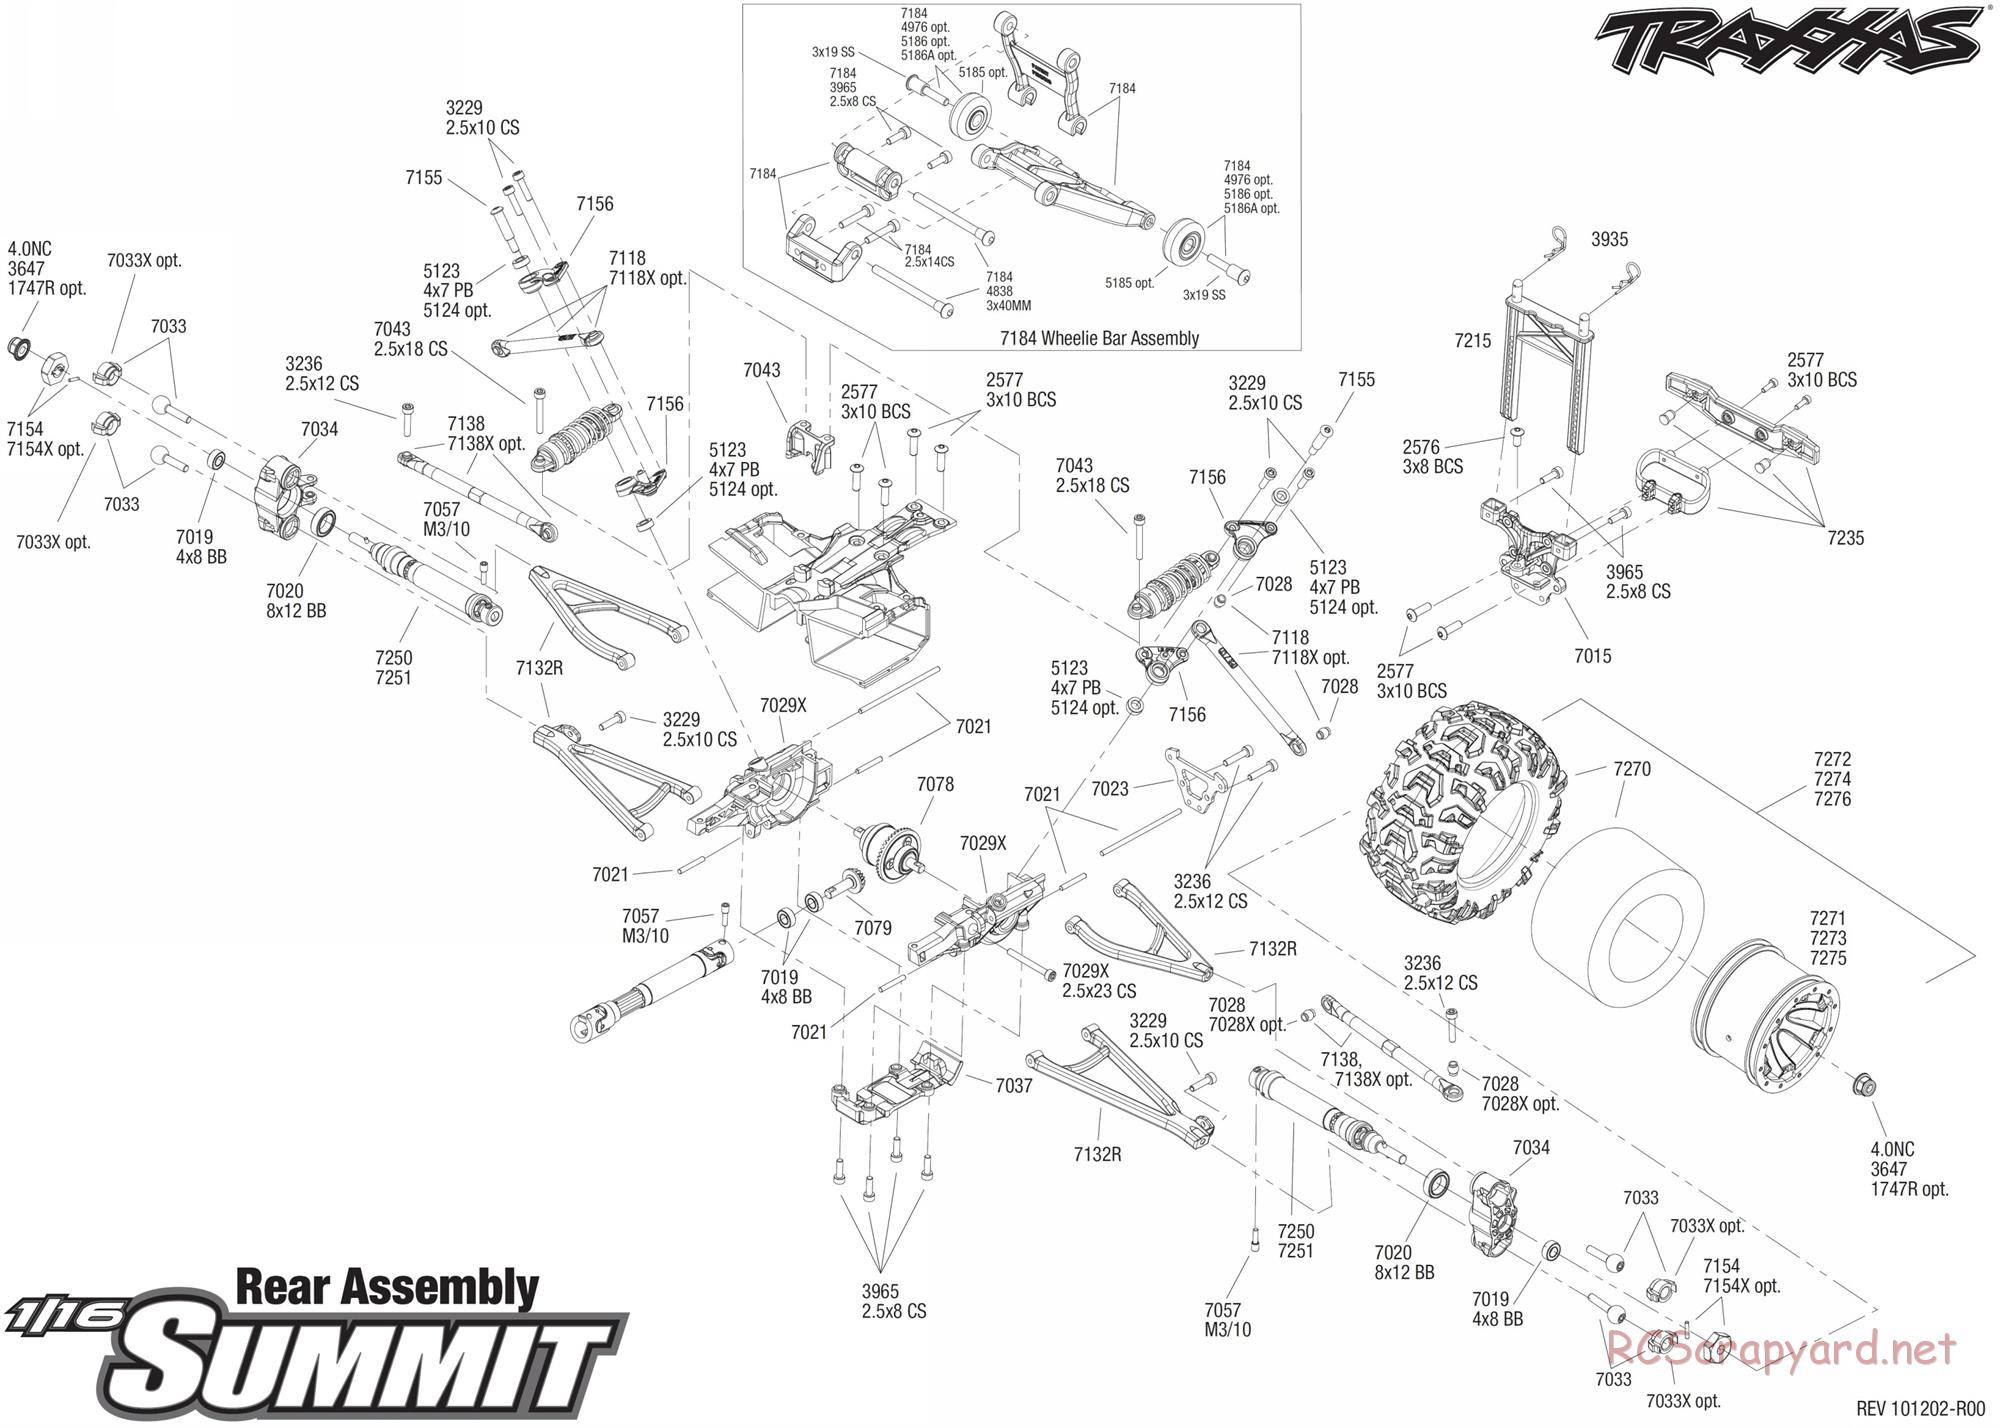 Traxxas - 1/16 Summit (2011) - Exploded Views - Page 4